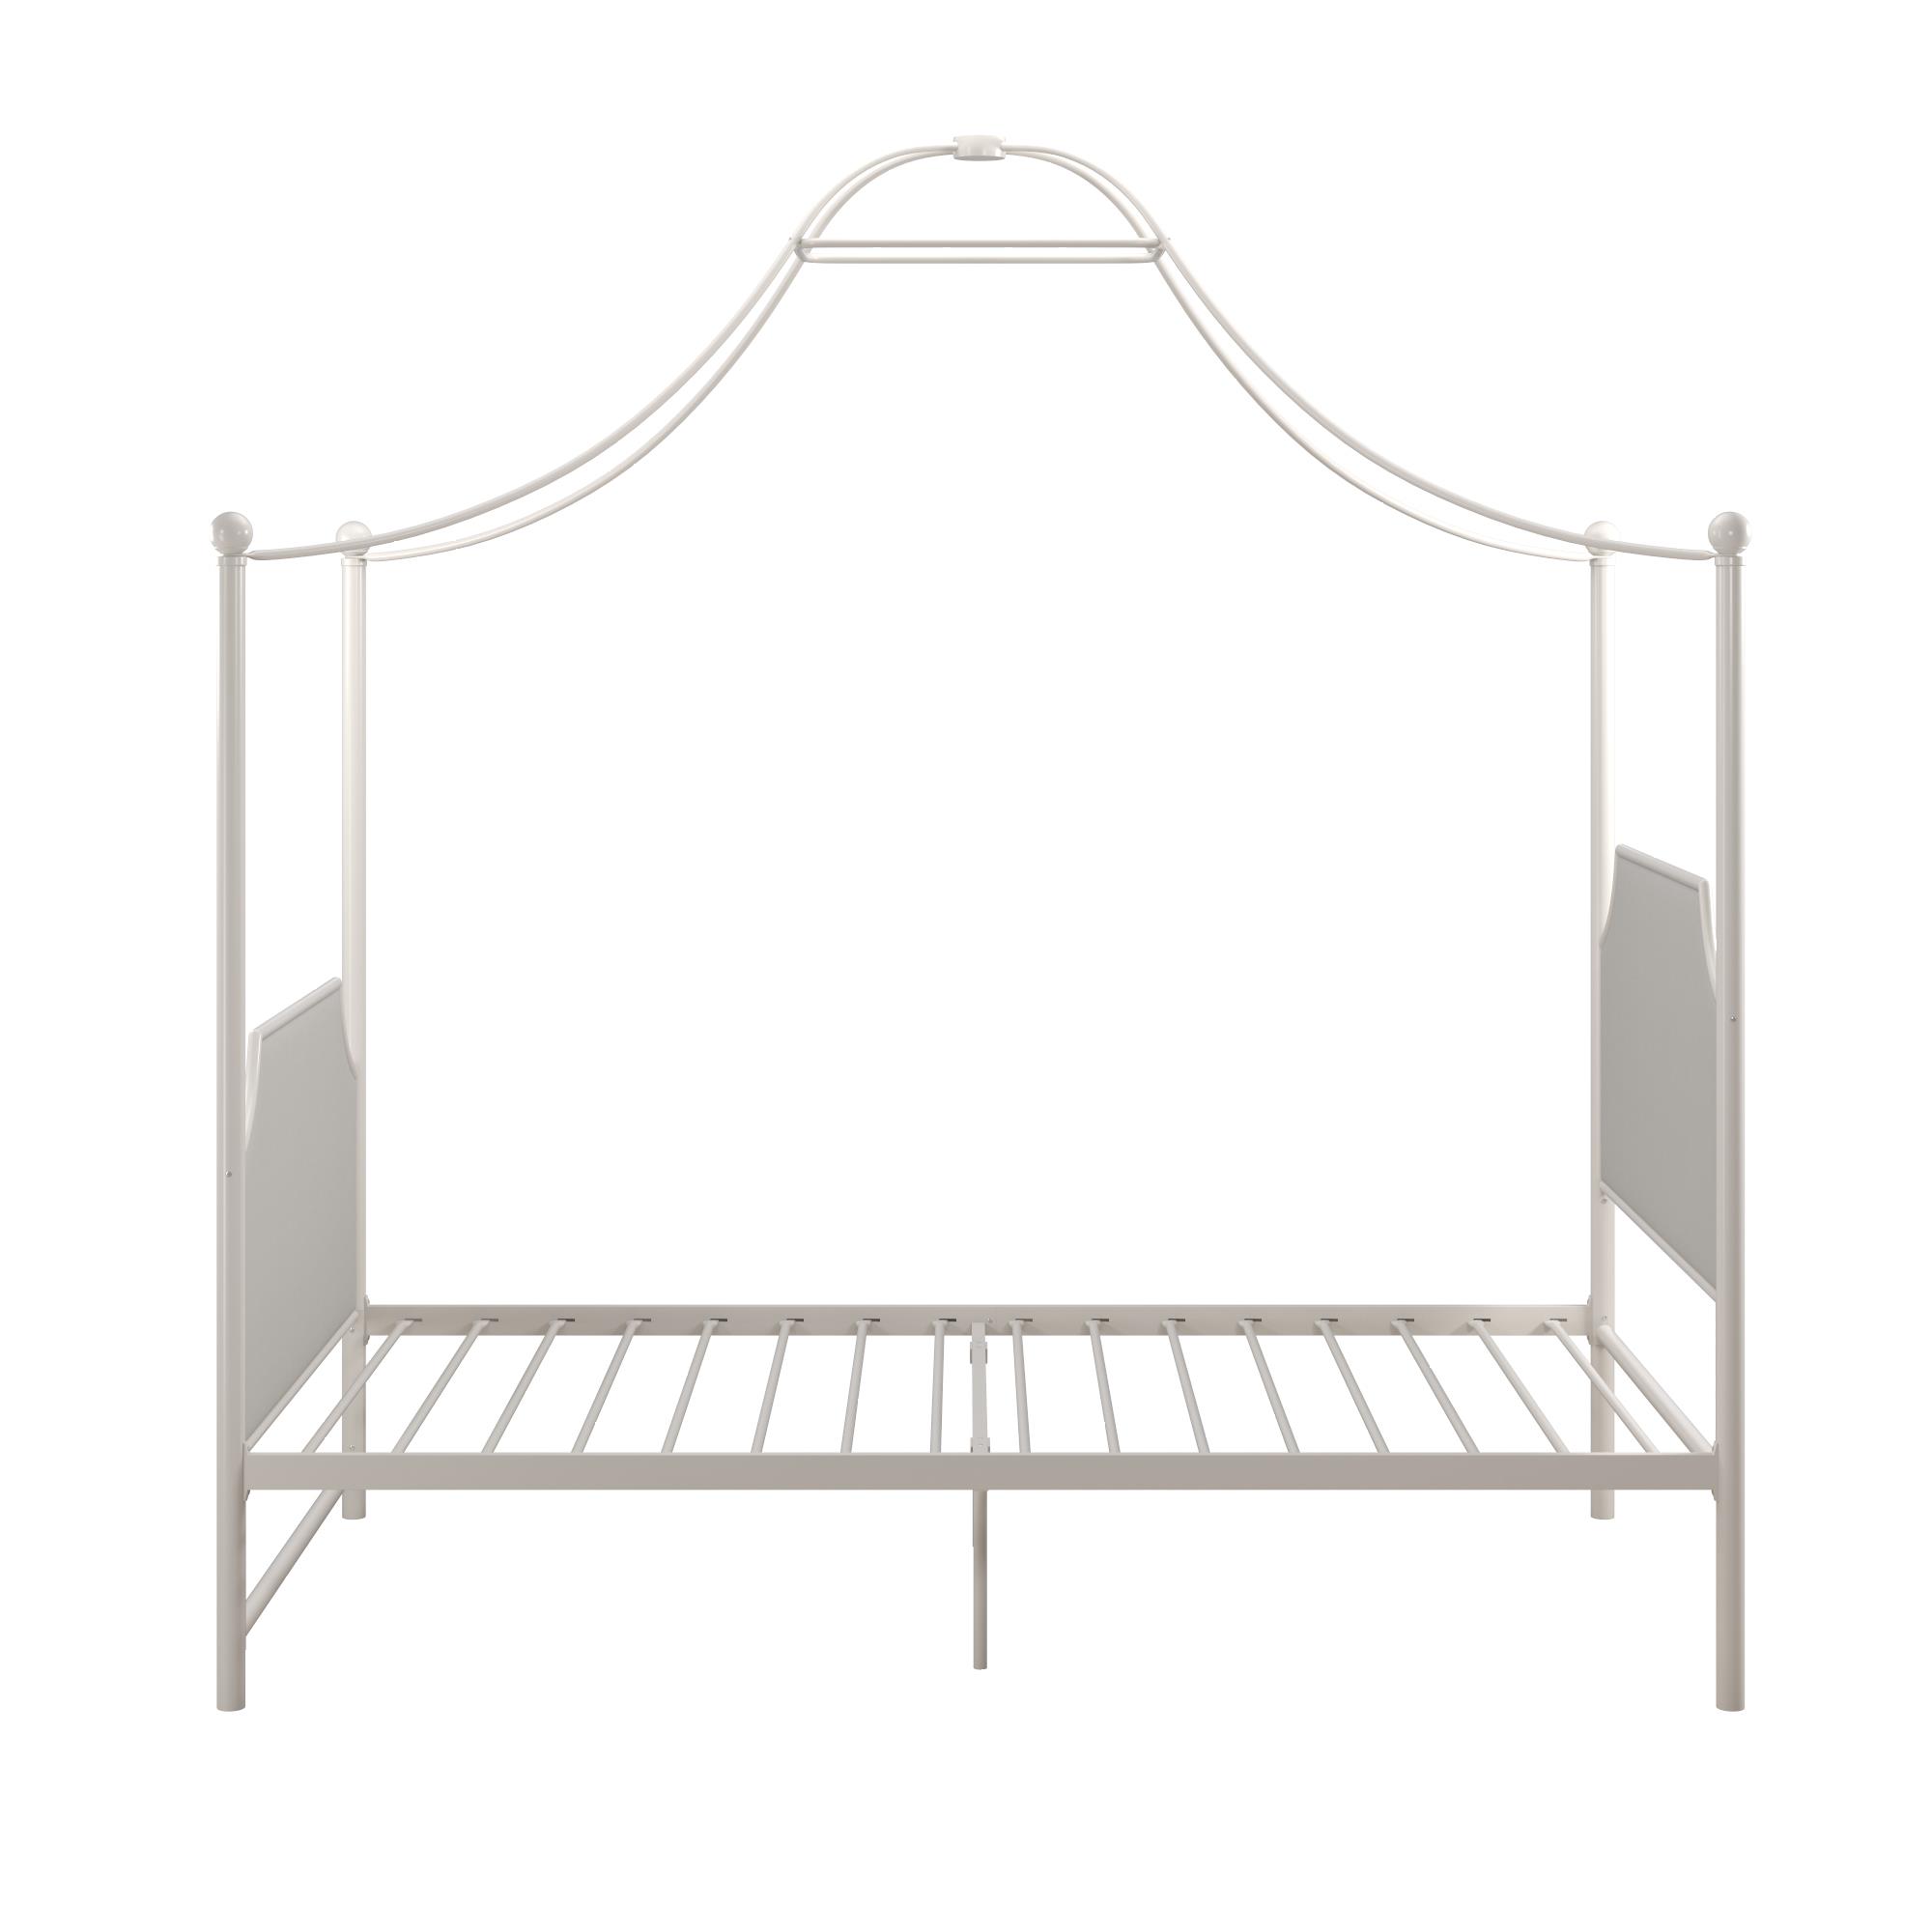 Little Seeds Monarch Hill Clementine Canopy Bed, Twin, Off White - image 3 of 10